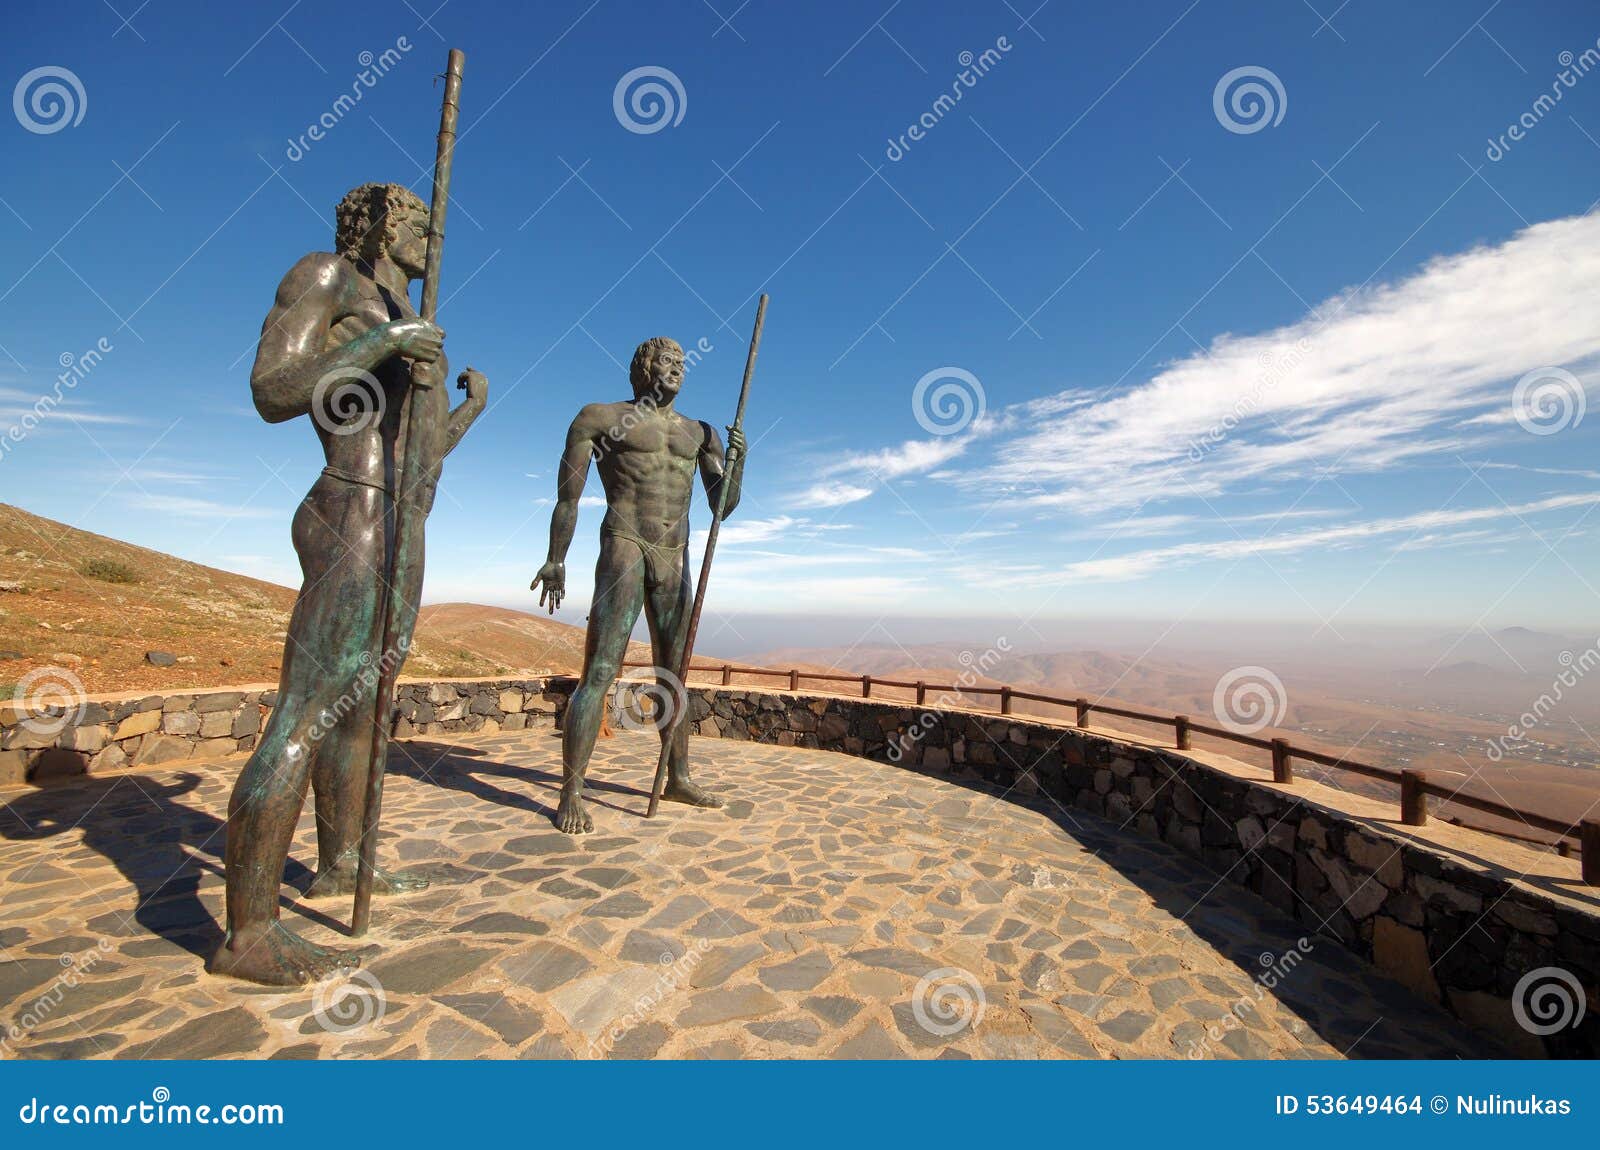 fuerteventura - bronze statues of two kings ayose and guise at t